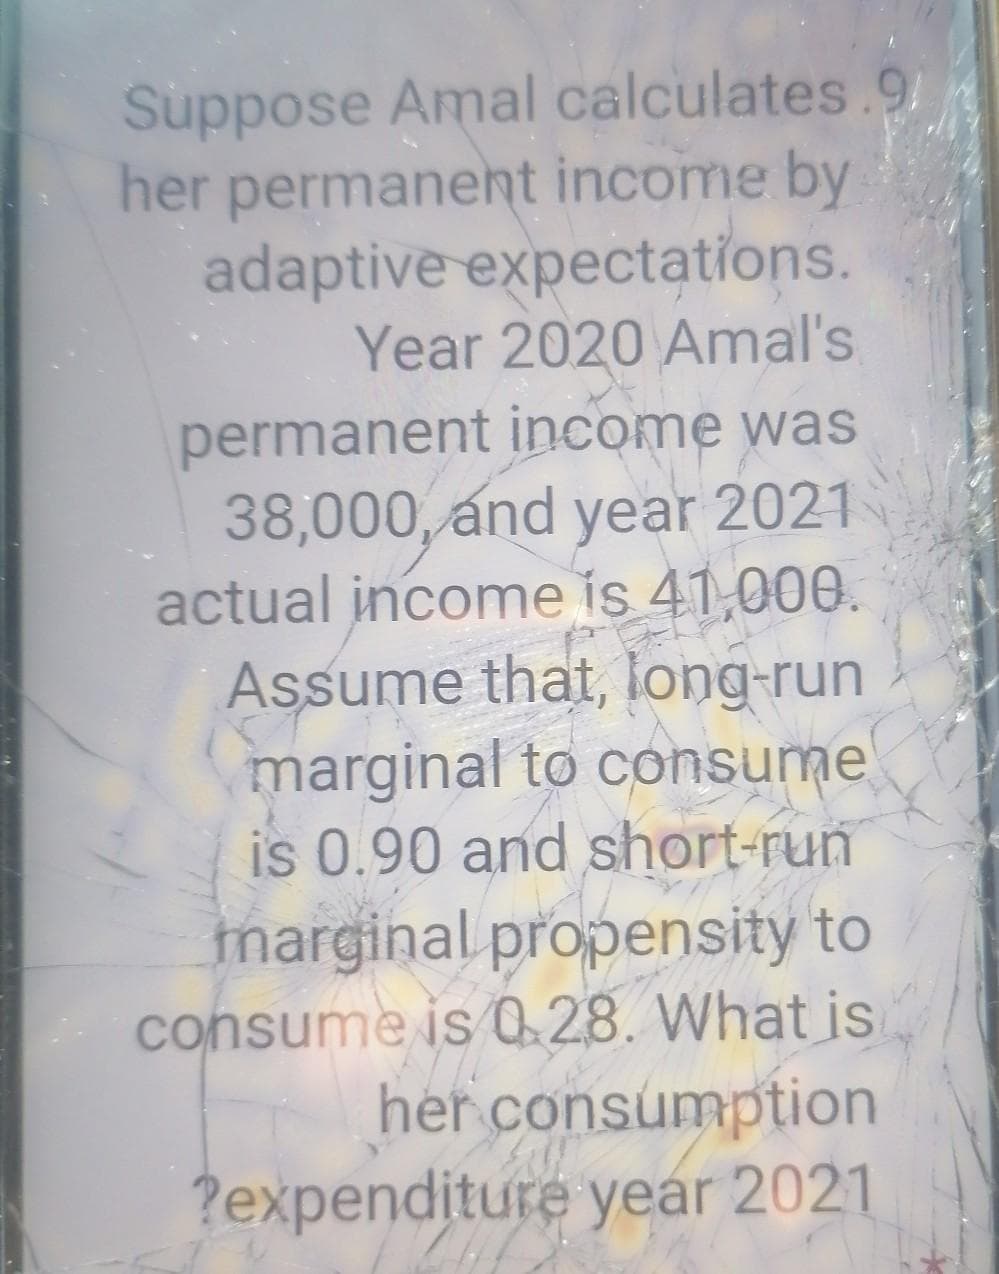 Suppose Amal calculates.9
her permanent income by
adaptive expectations.
Year 2020 Amal's
permanent income was
38,000, and year 2021
actual income is 41,000.
Assume that, long-run
marginal to consume
is 0.90 and short-run
tmarginal propensity to
consume is 0 28. What is
her consumption
?expenditure year 2021
